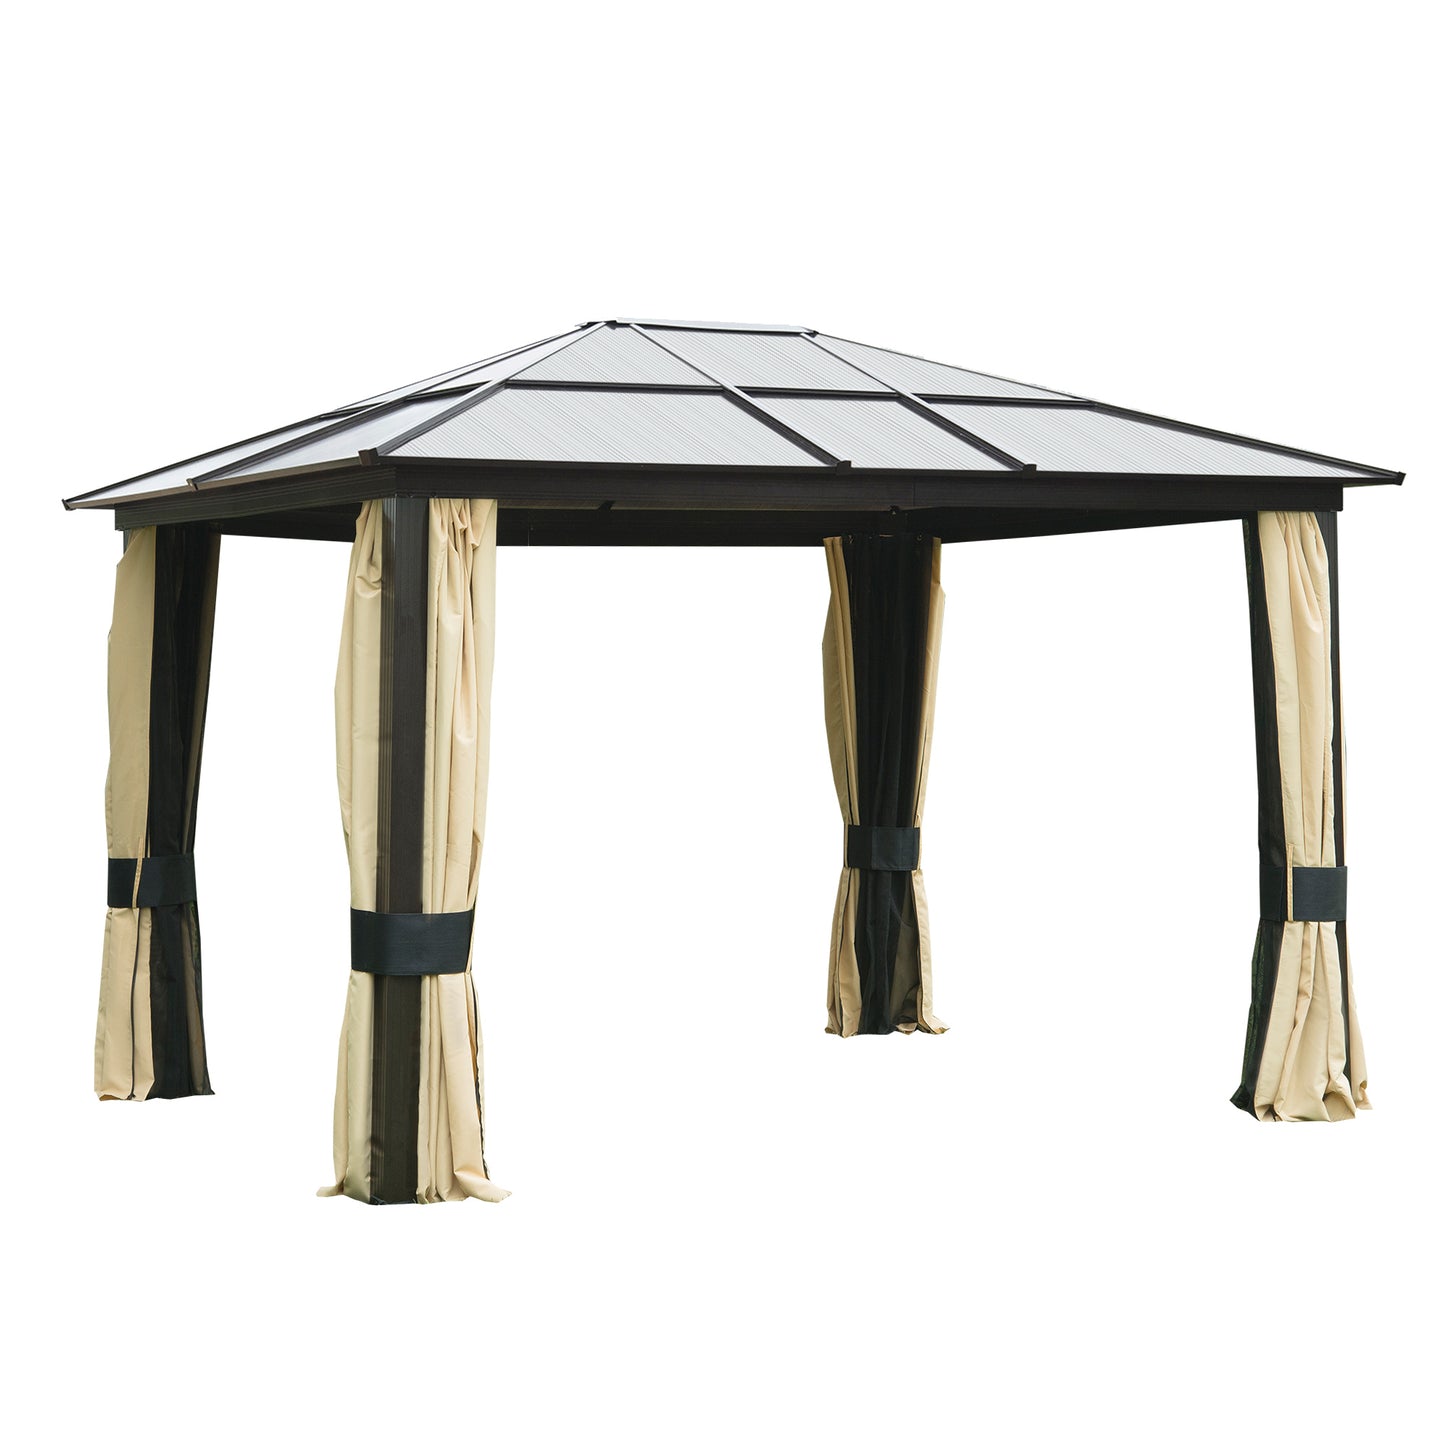 Outsunny 3.6 x 3(m) Hardtop Gazebo Canopy with Polycarbonate Roof and Aluminium Frame, Garden Pavilion with Mosquito Netting and Curtains, Brown - OutdoorBox